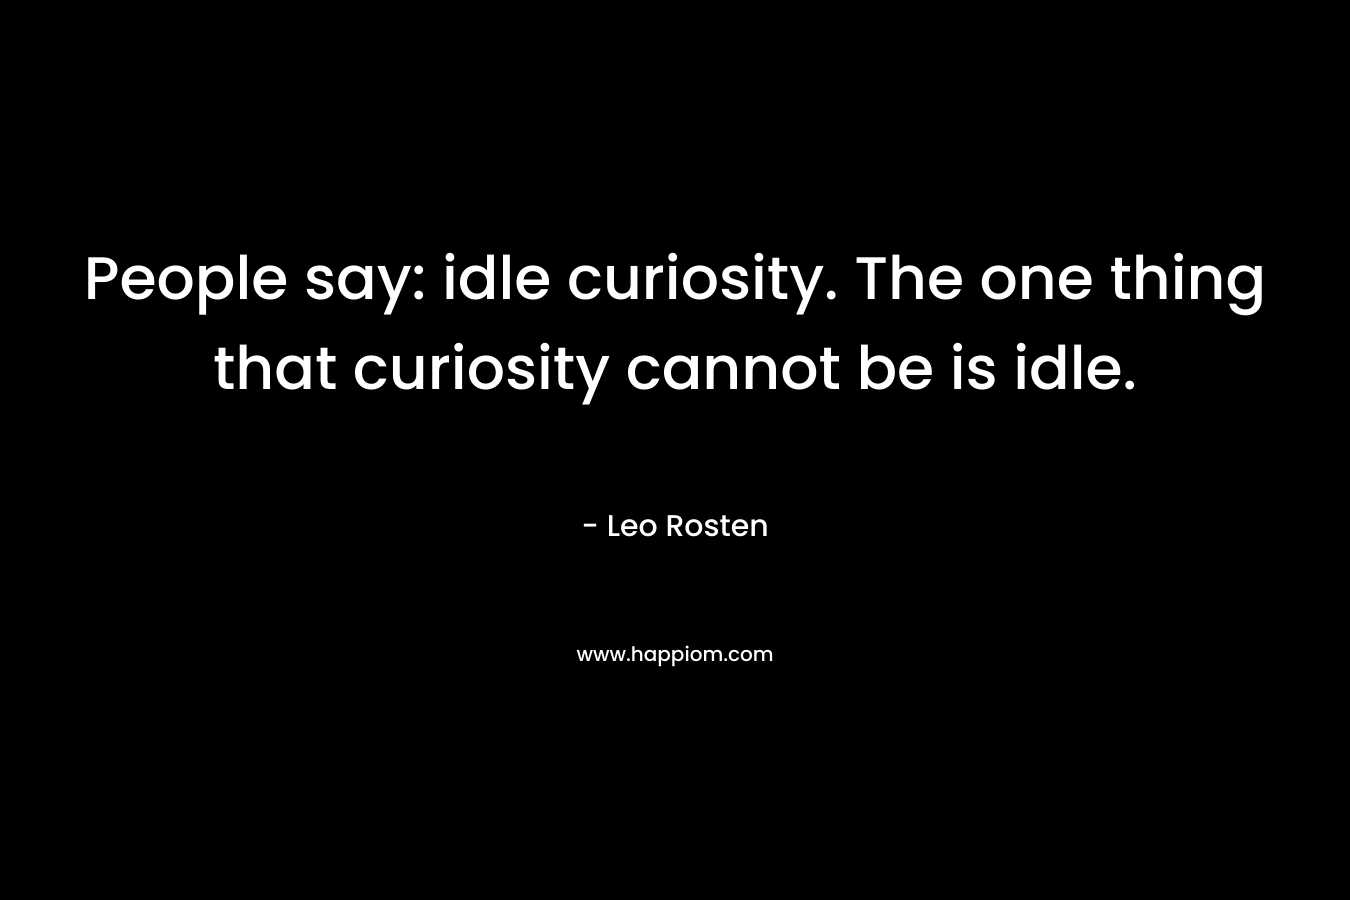 People say: idle curiosity. The one thing that curiosity cannot be is idle. – Leo Rosten